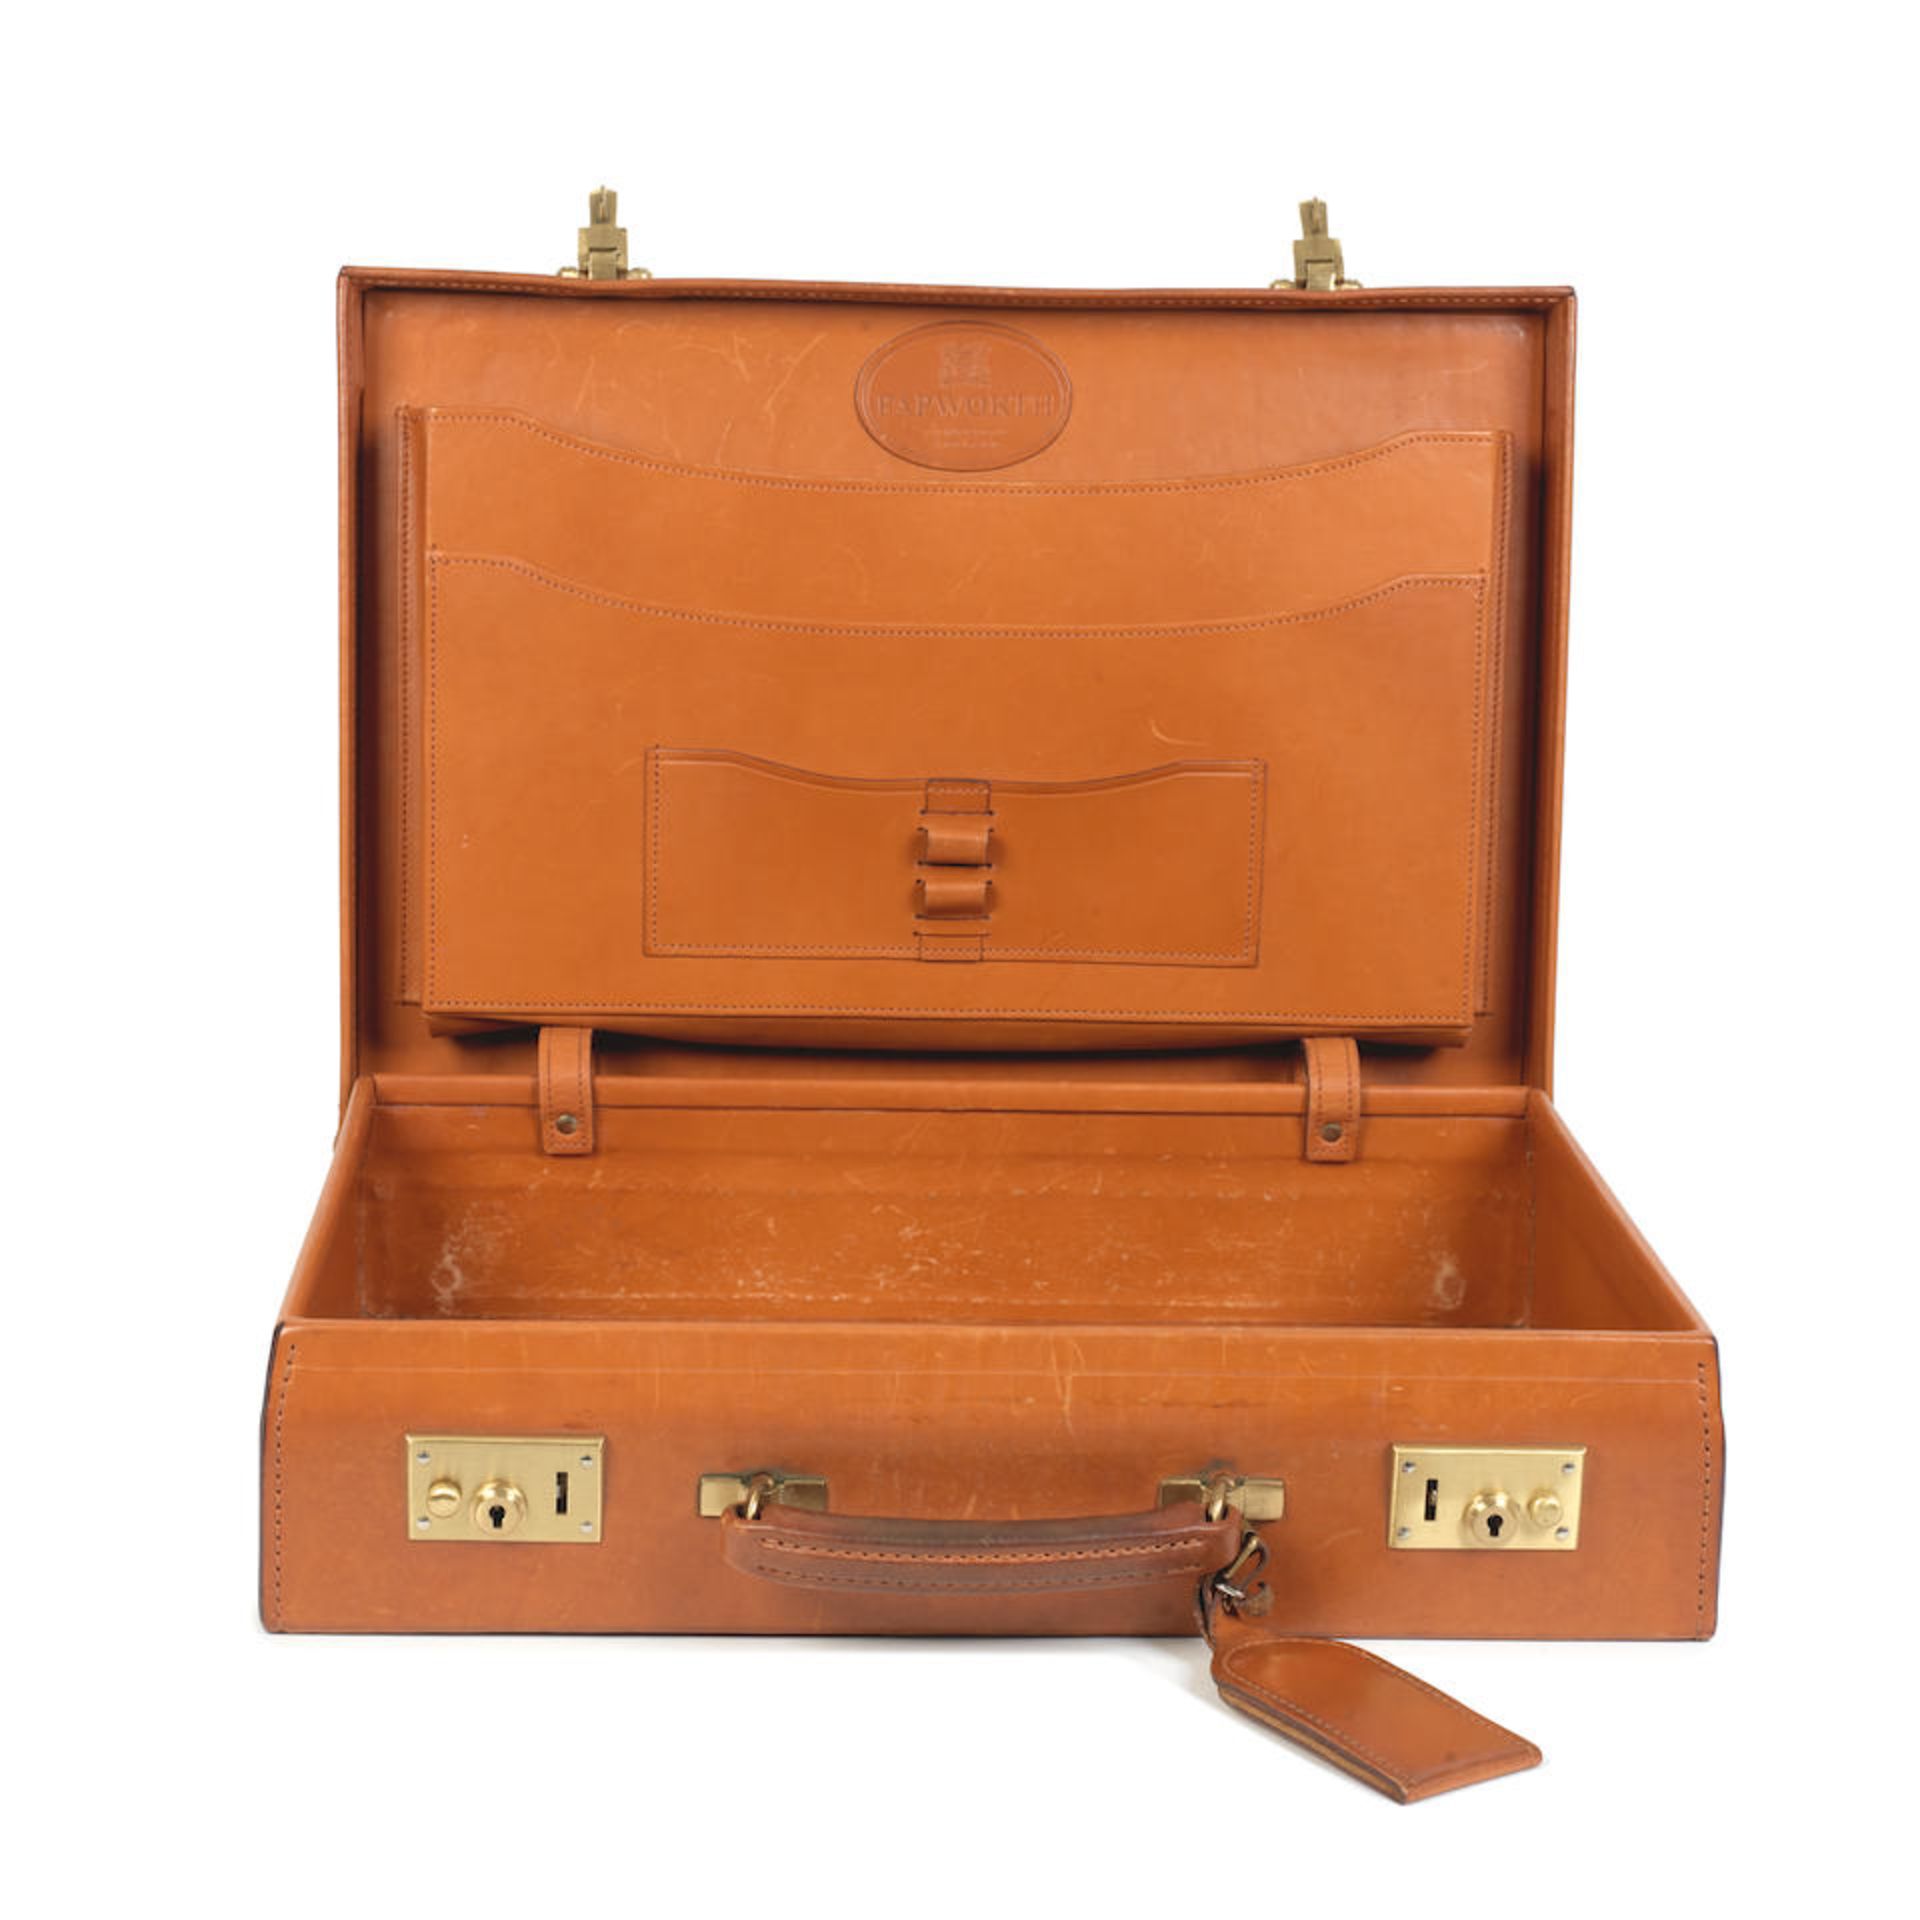 Papworth for Swain Adney Brigg: a Tan Bridle Leather Attaché Briefcase (includes luggage tag) - Bild 2 aus 2